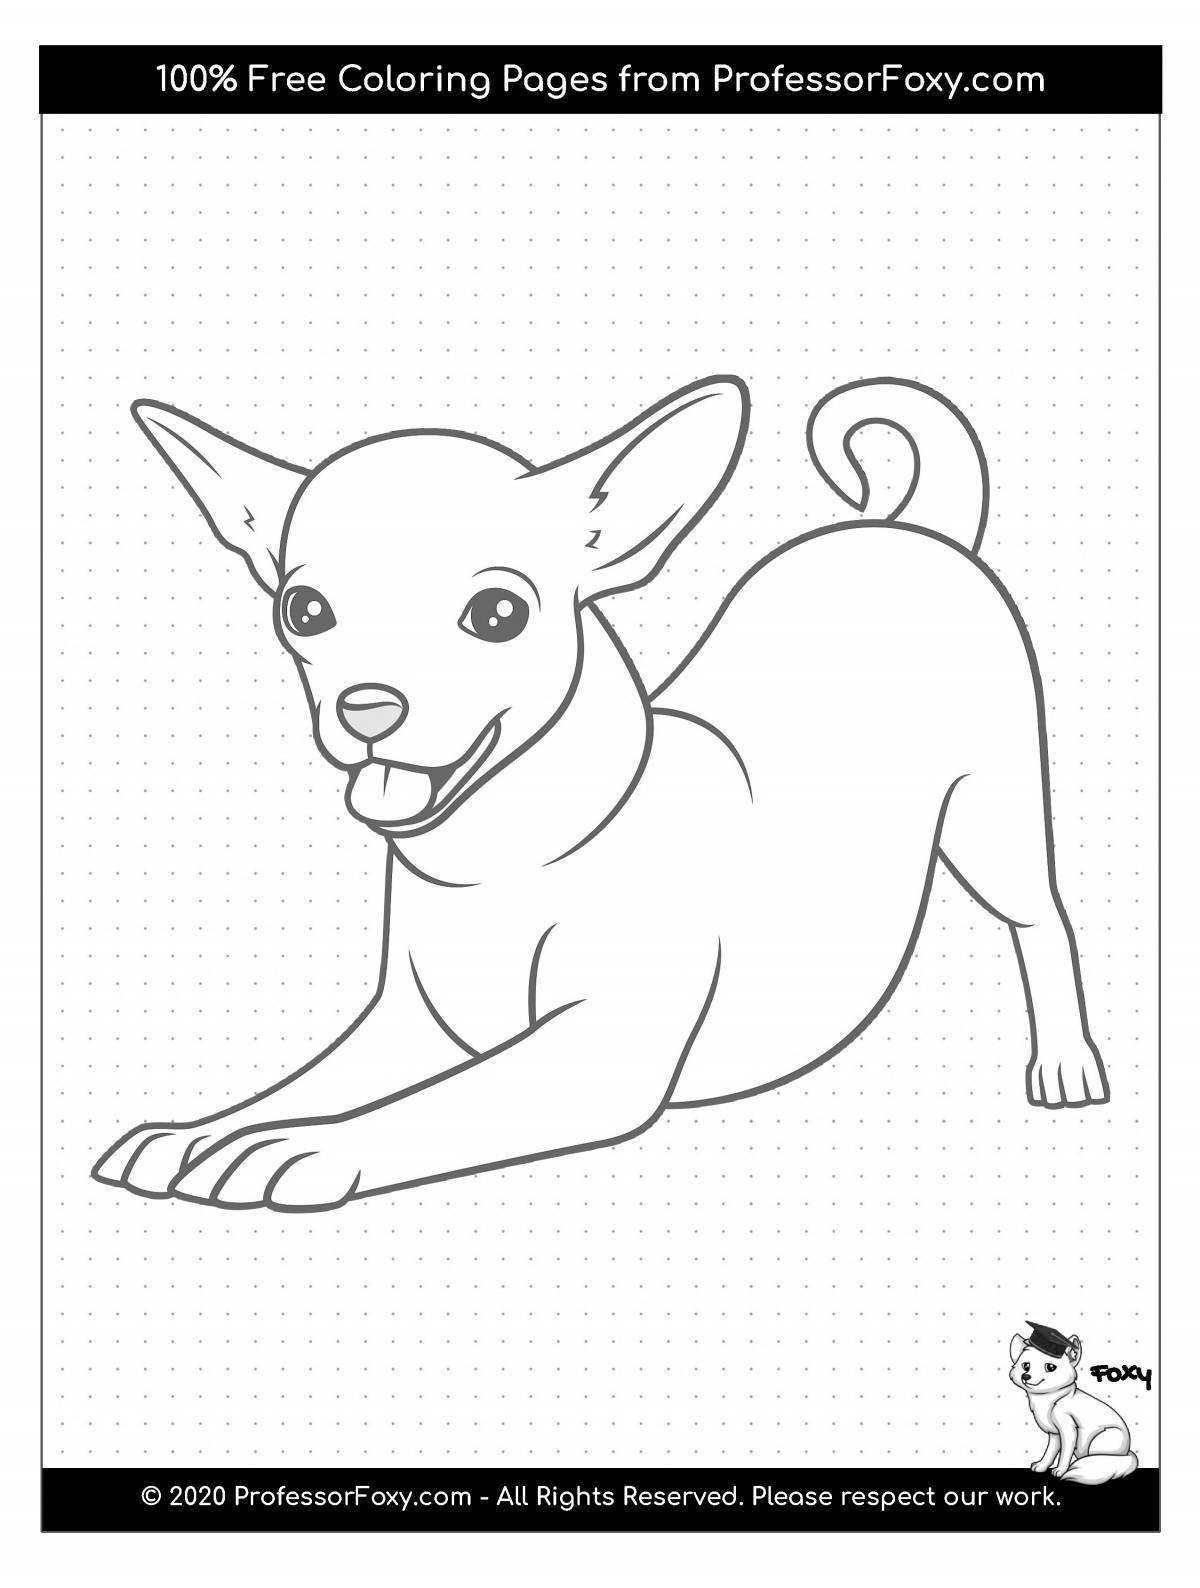 Coloring book inquisitive chihuahua dog